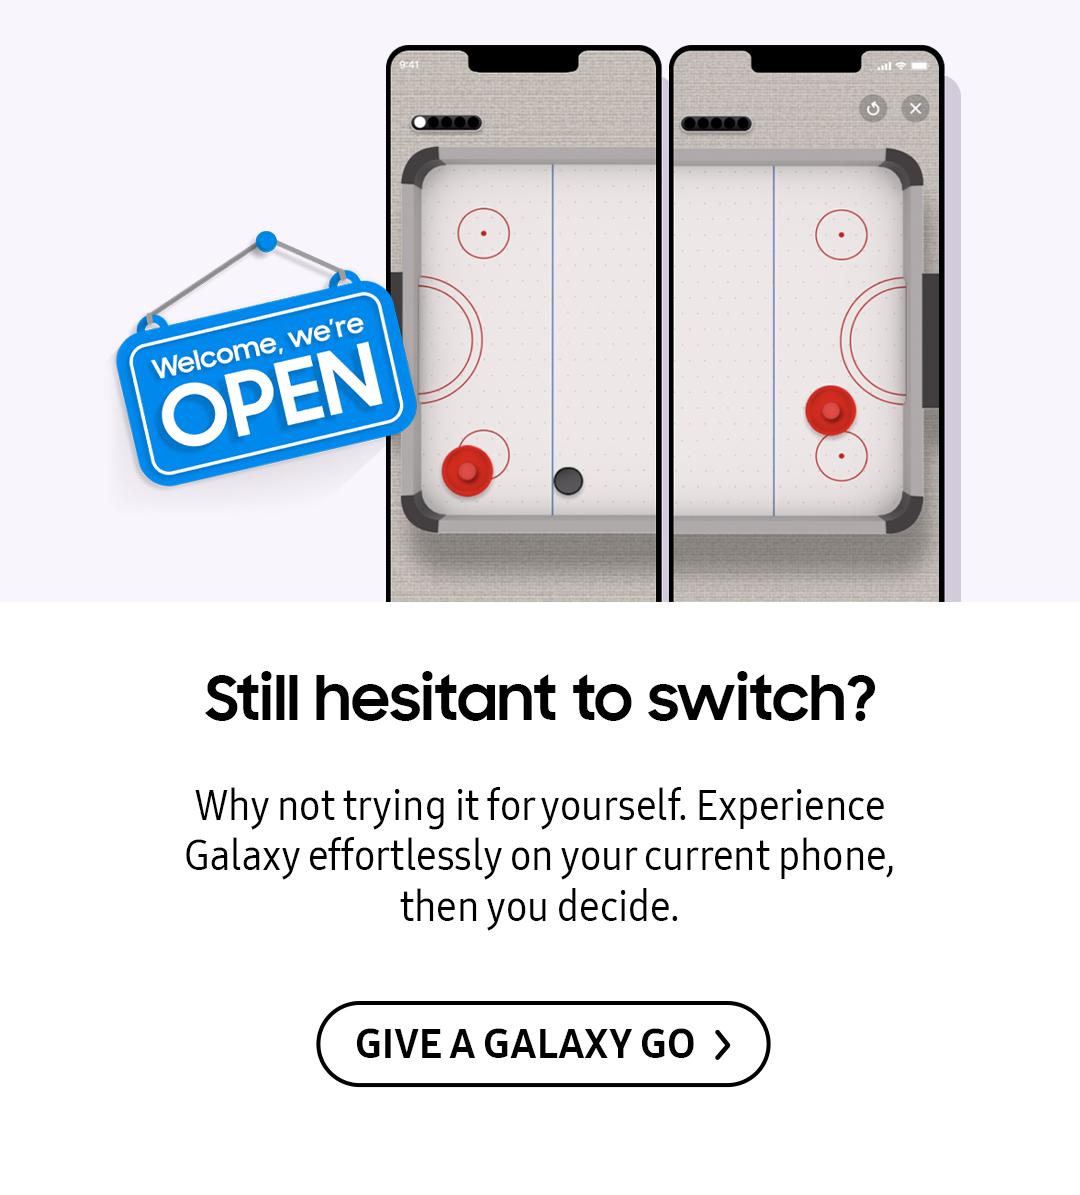 Still hesitant to switch? Why not trying it yourself. Experience Galaxy effortlessly on your current phone, then you decide. Click here to try it!